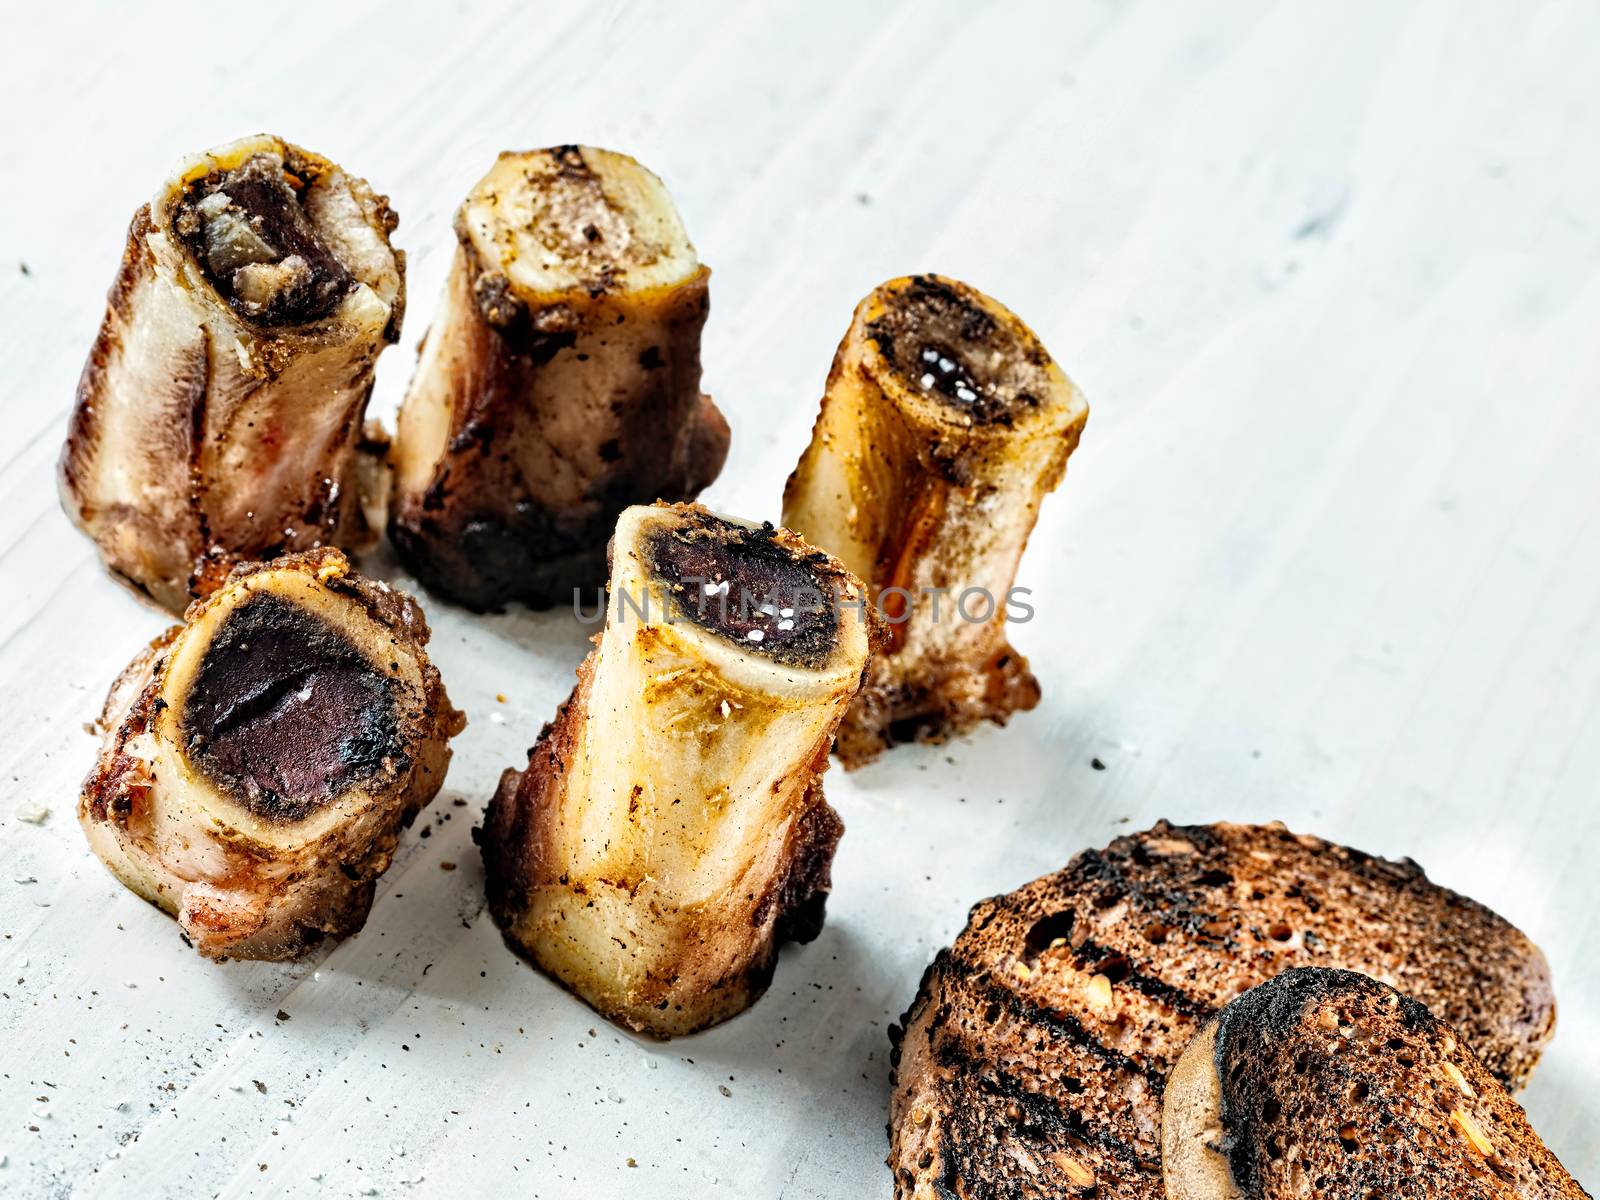 rustic english bone marrow toast by zkruger